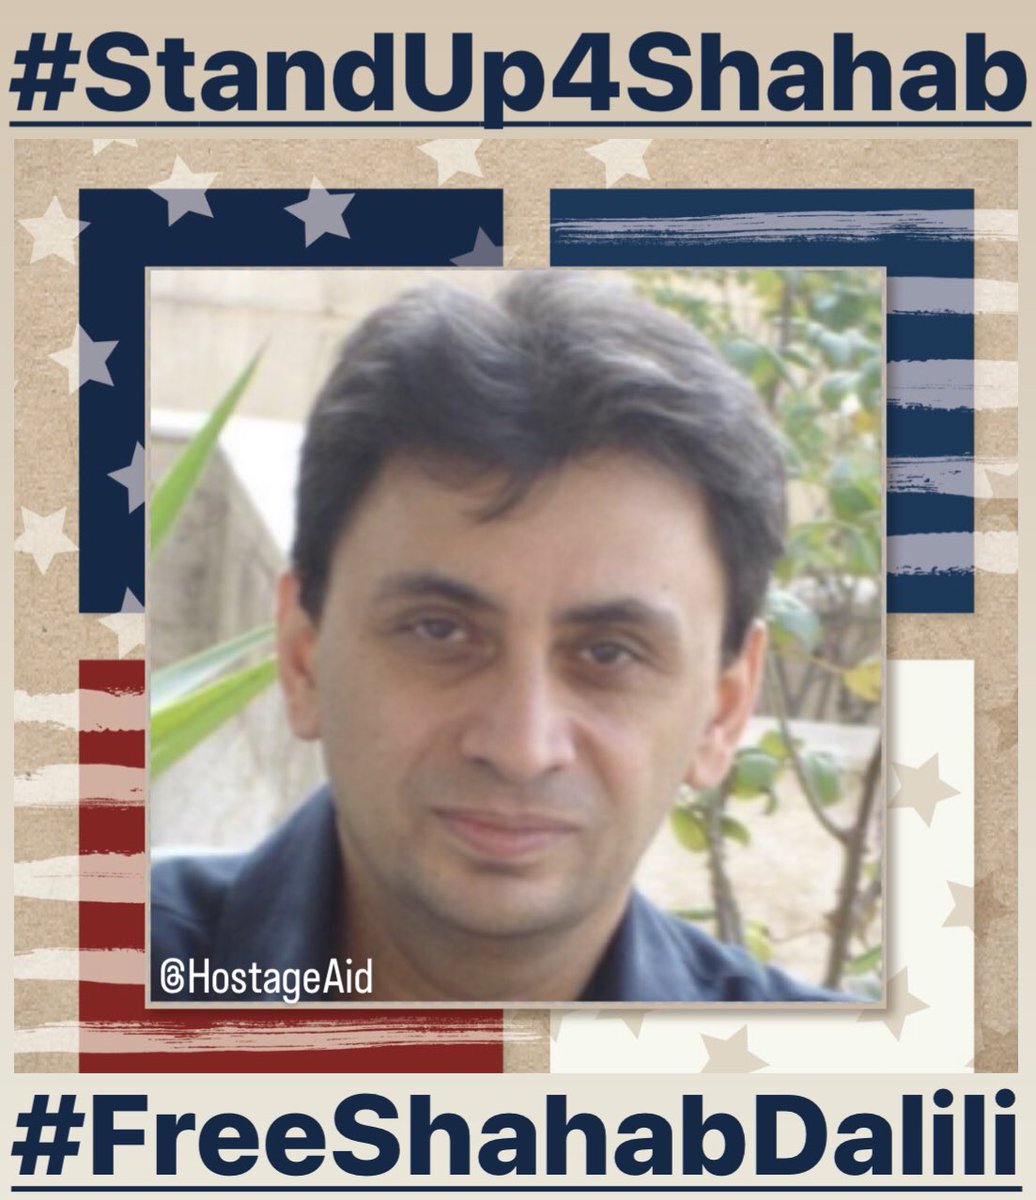 Let’s #StandUp4Shahab as a US legal permanent resident;

Let’s #StandUp4Shahab as an innocent held by the #IranianRegime for 7 yrs;

Let’s #StandUp4Shahab’s right in applying the Levinson Act;

Let’s #StandUp4Shahab & call on the @StateDept & @SecBlinken to designate him